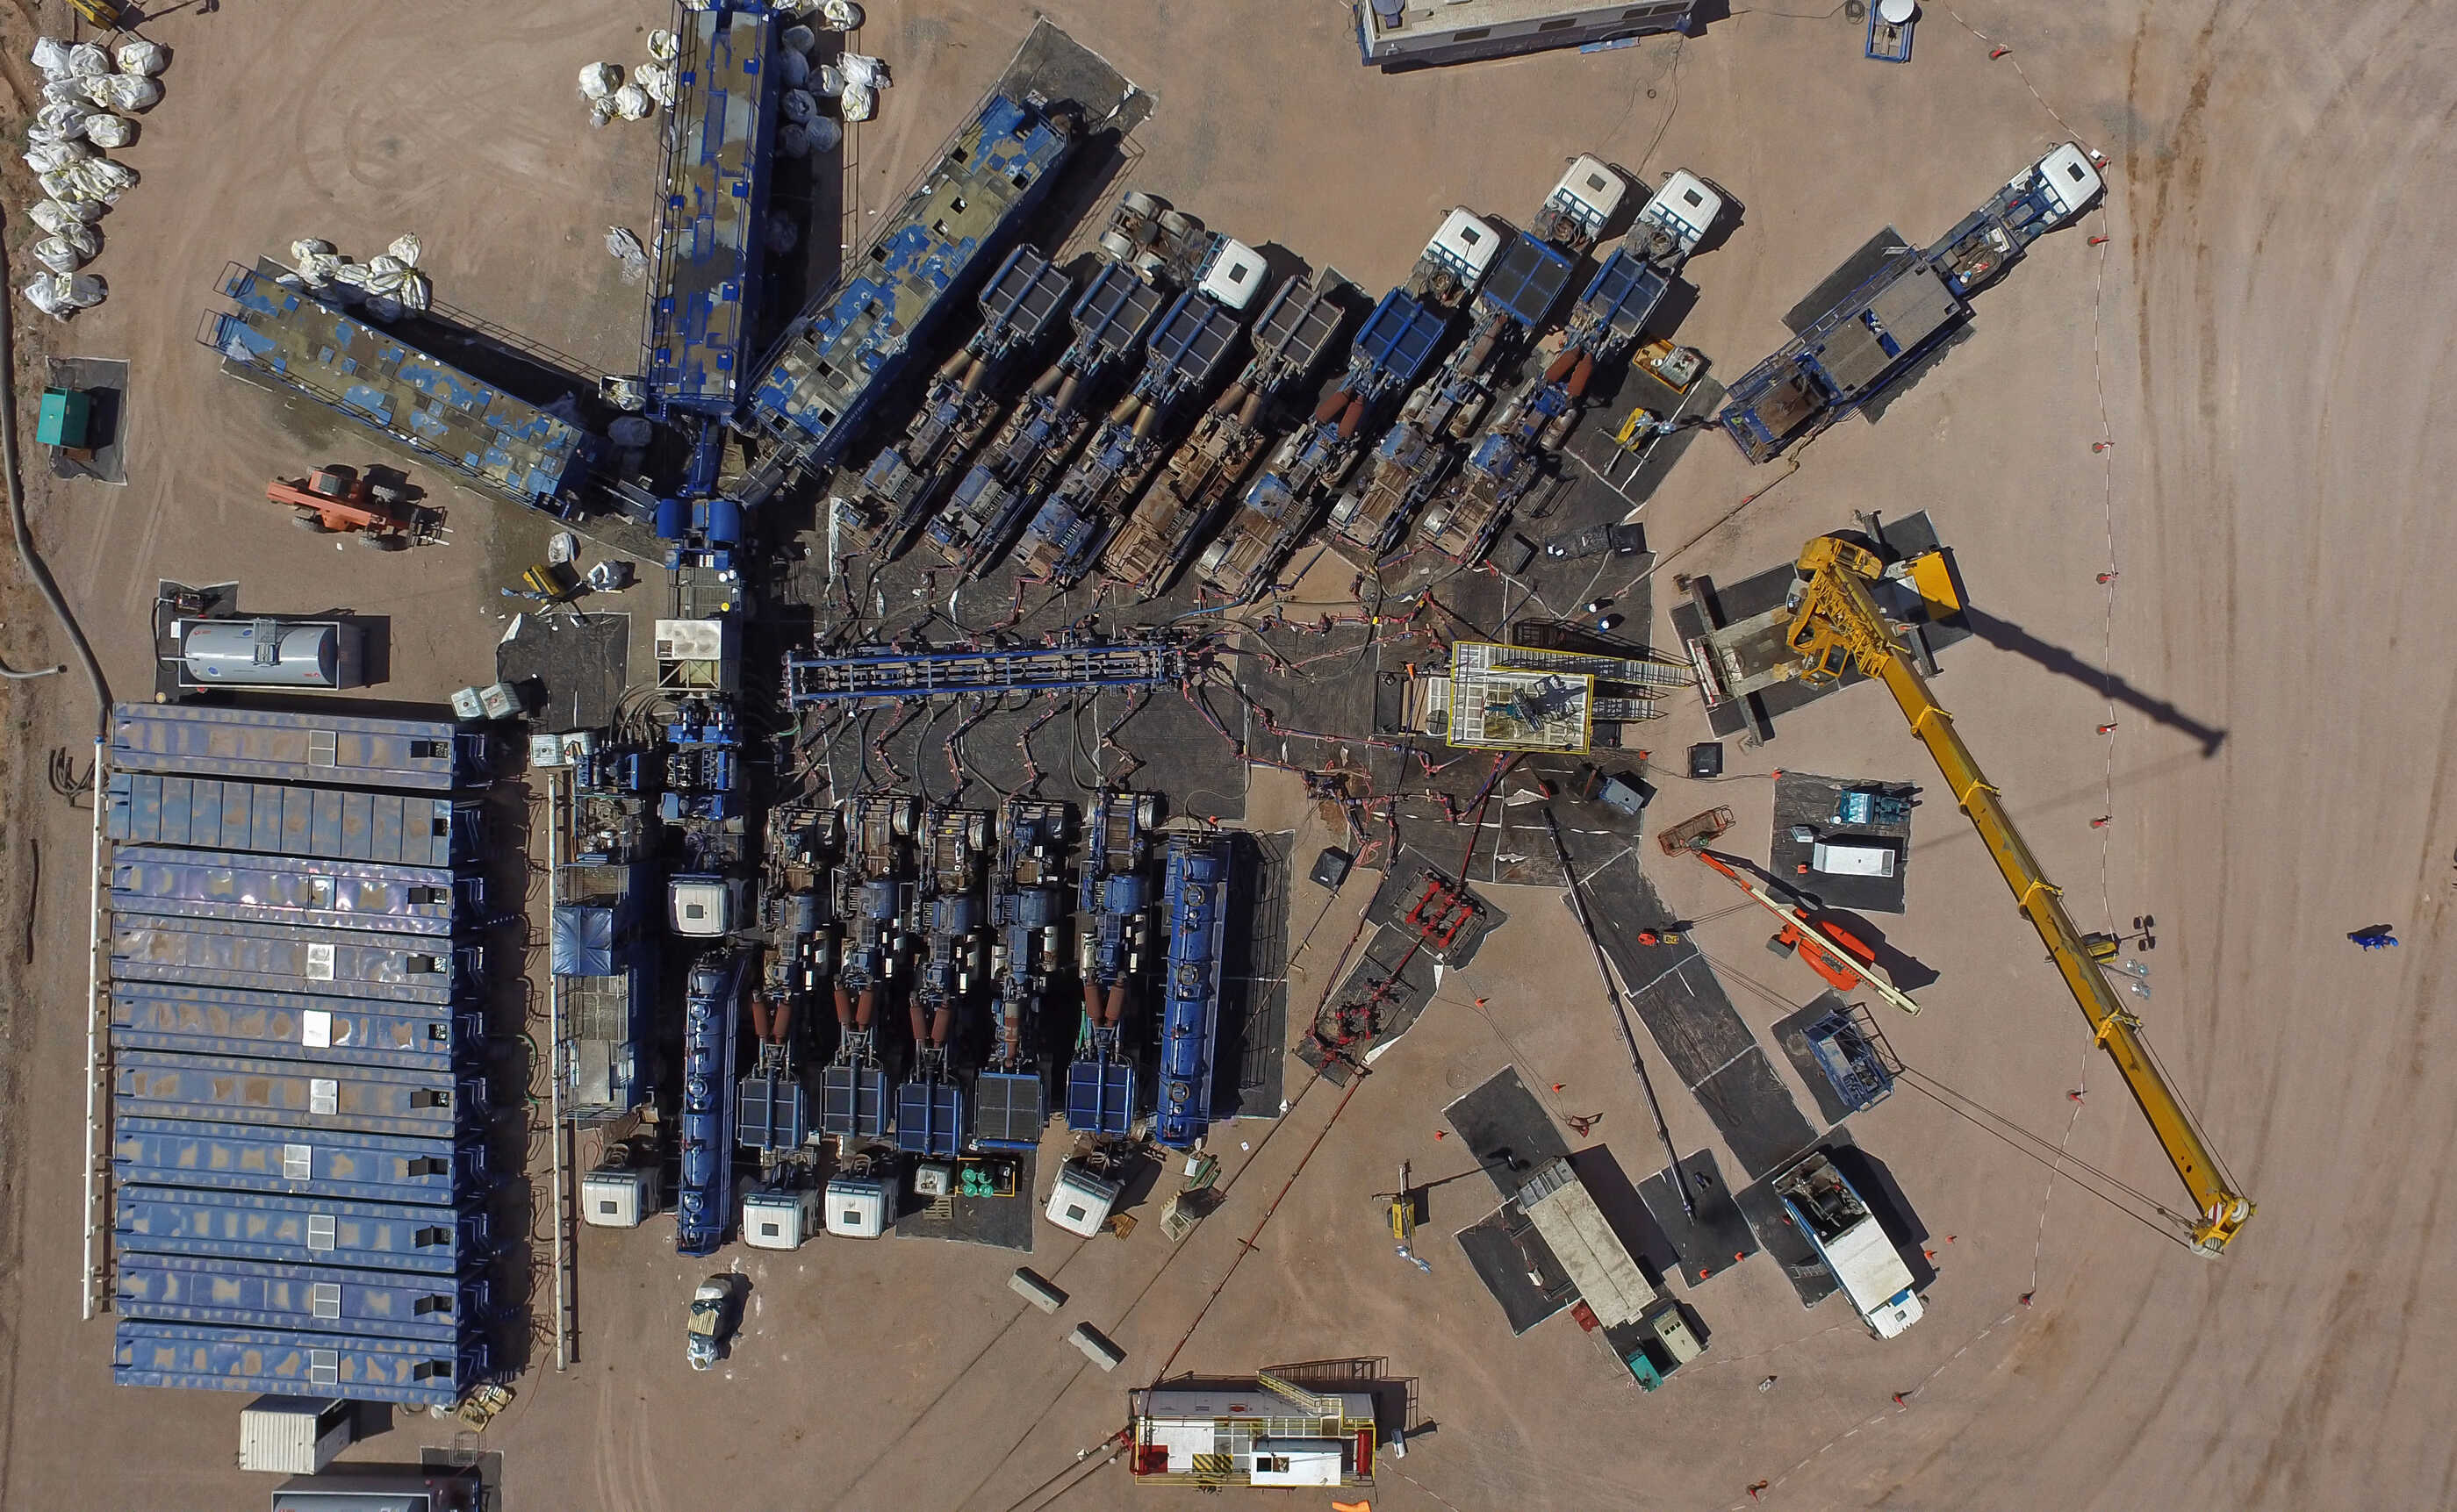 Aerial photo of hydraulic fracturing equipment. (Fracking)